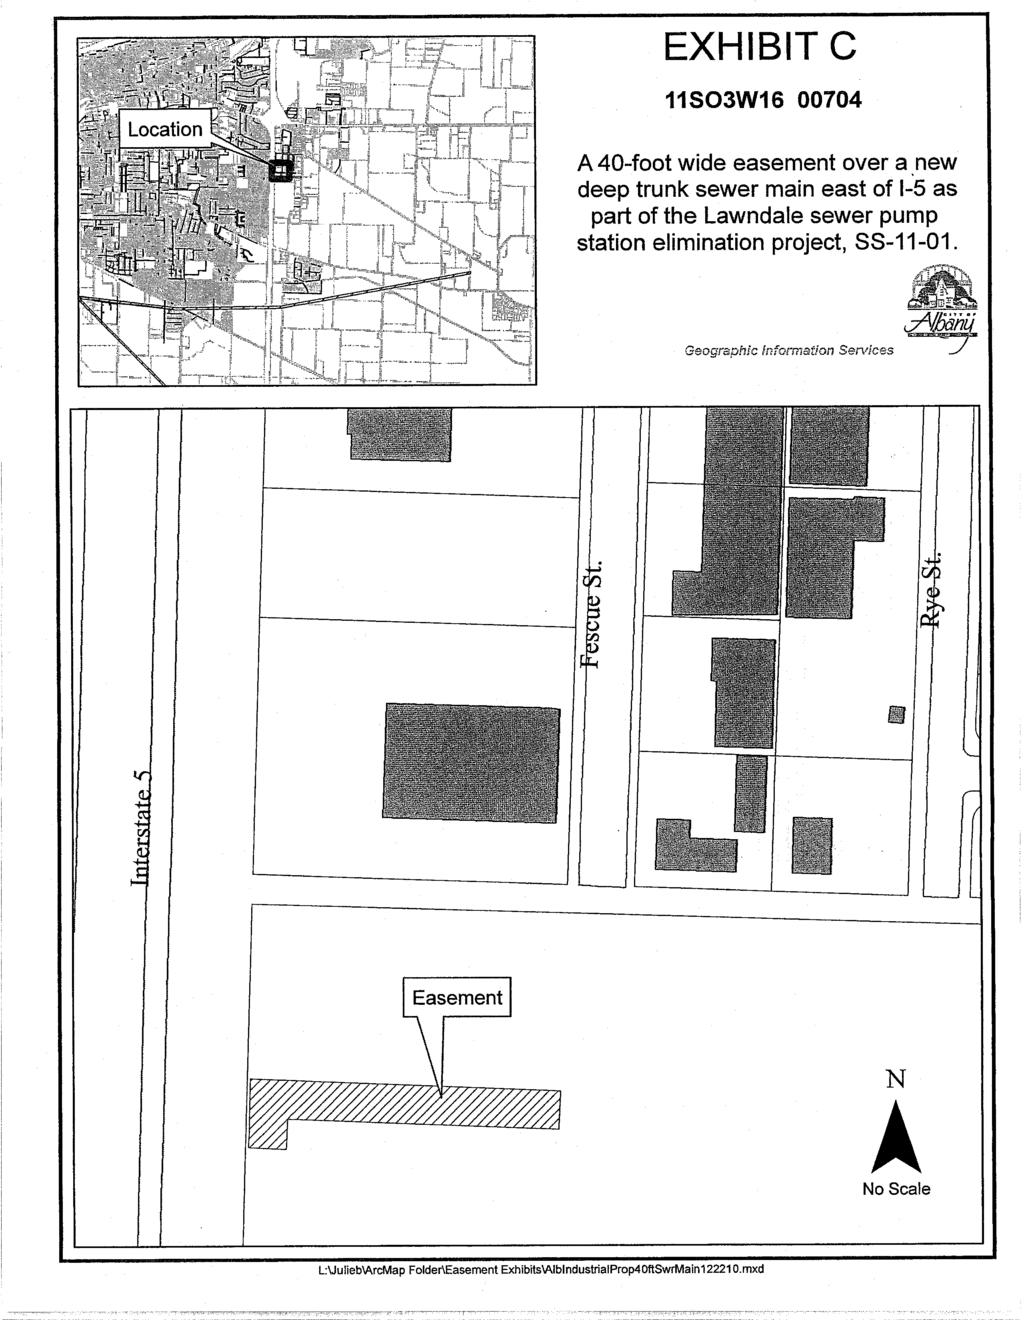 EXHIBIT C 11SO3W16 00704 A 40 foot - wide easement over a new deep trunk sewer main east of 1-5 as part of the Lawndale sewer pump station